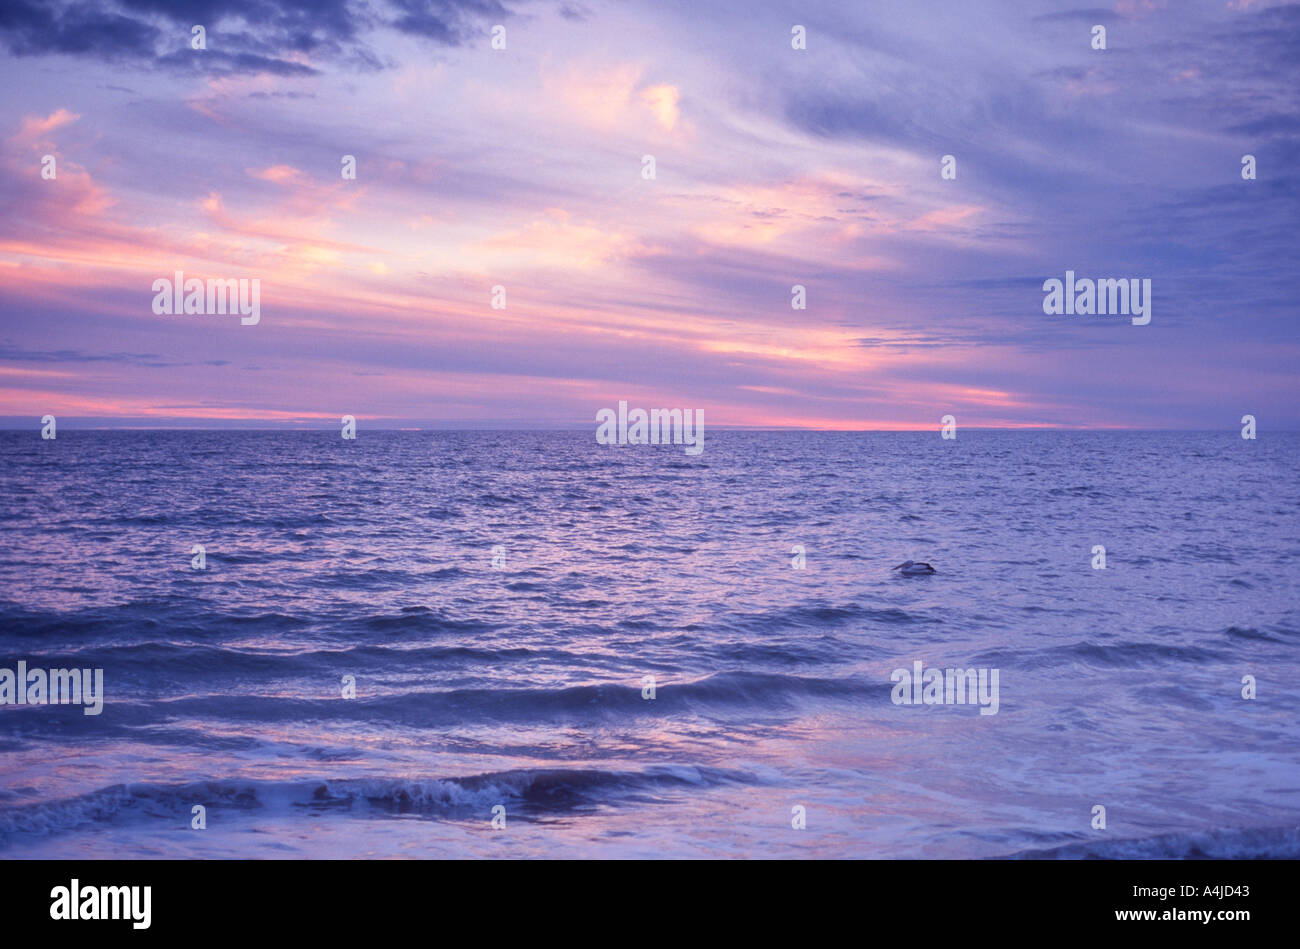 Pelican swimming past at stormy sunset with pastel sky Stock Photo